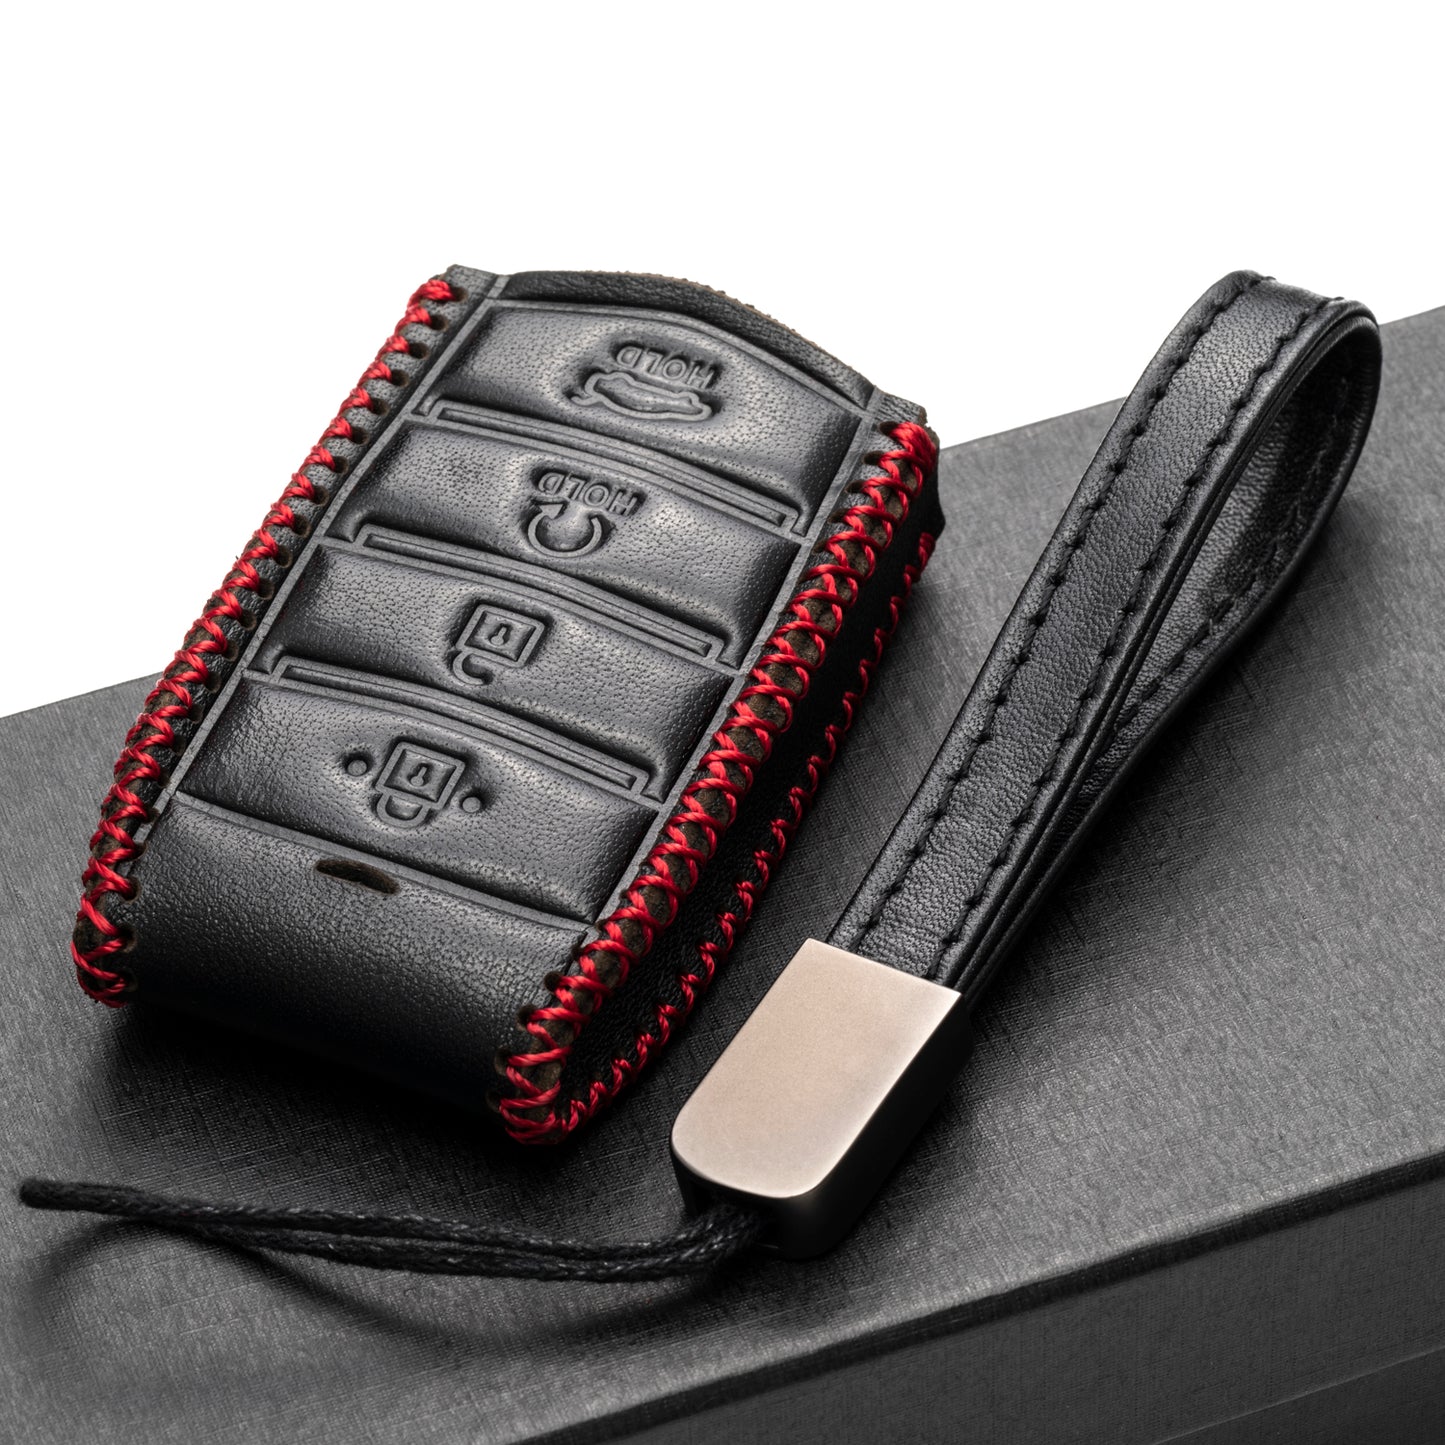 Vitodeco 4-Button Genuine Leather Smart Key Fob Case Cover Protector with Leather Key Strap Compatible for 2017-2020 Genesis G70, G80, G90 (Remote Start)